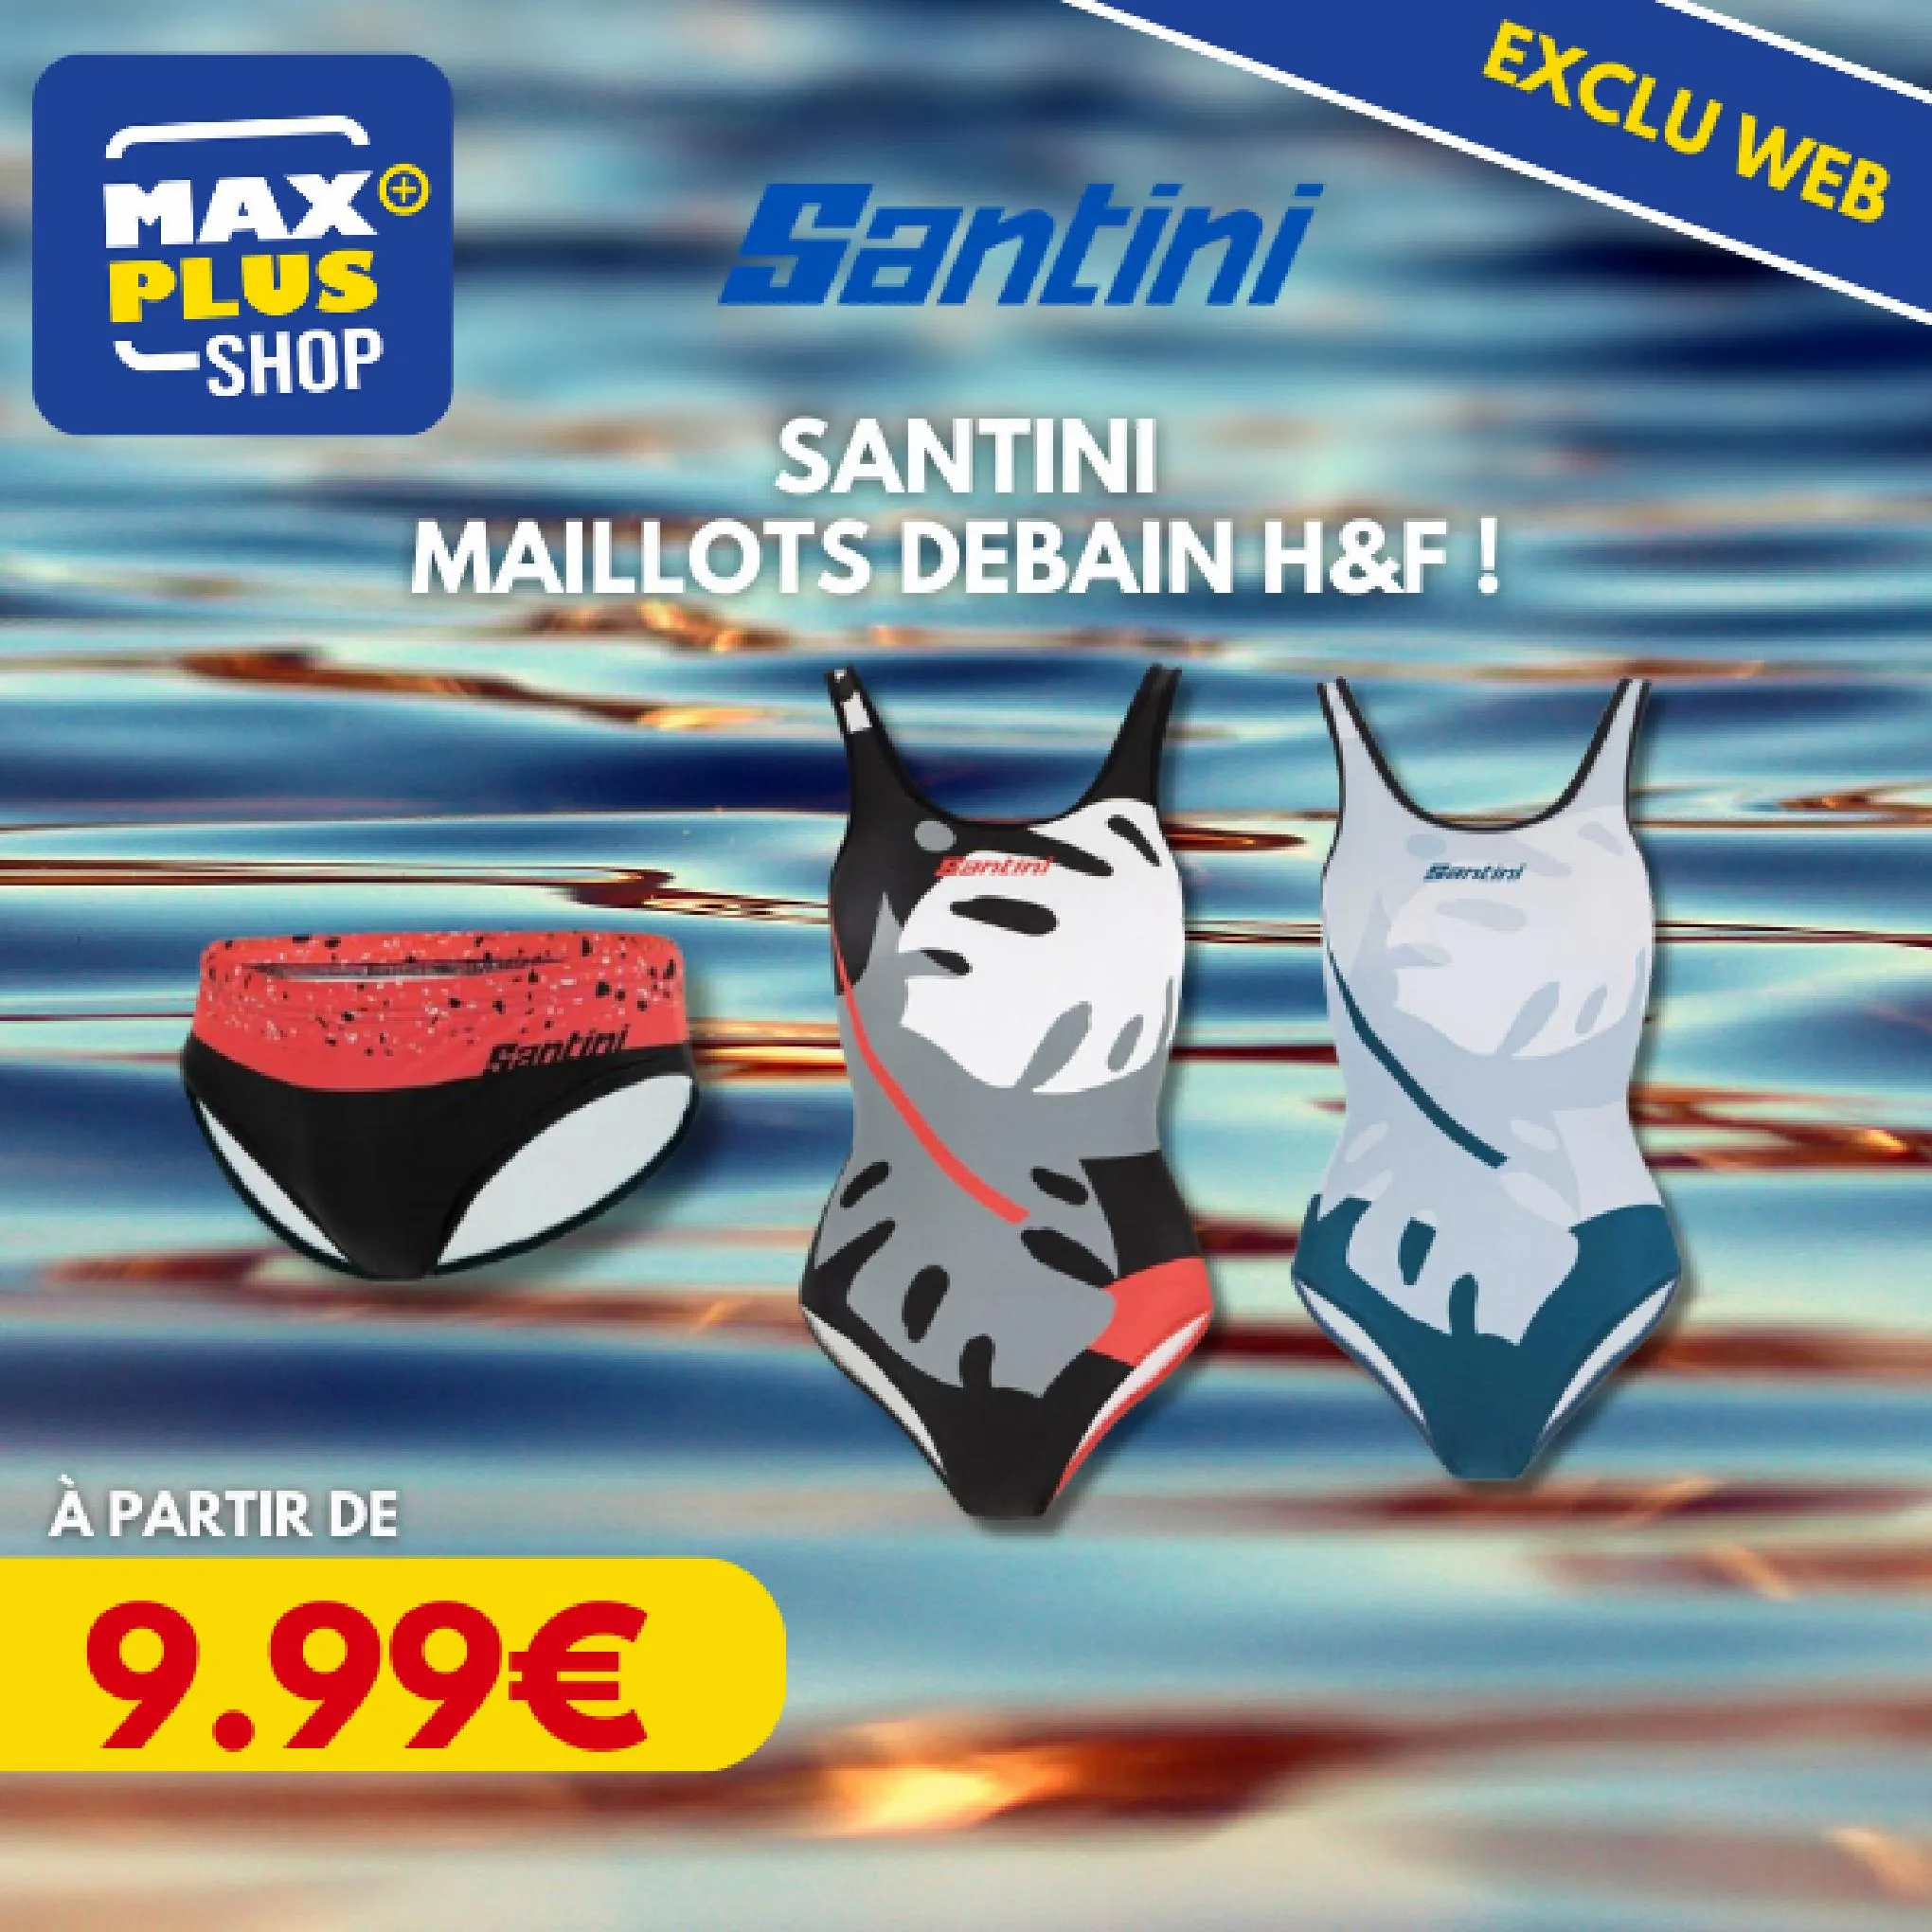 Catalogue Offres Speciales Max Plus, page 00001